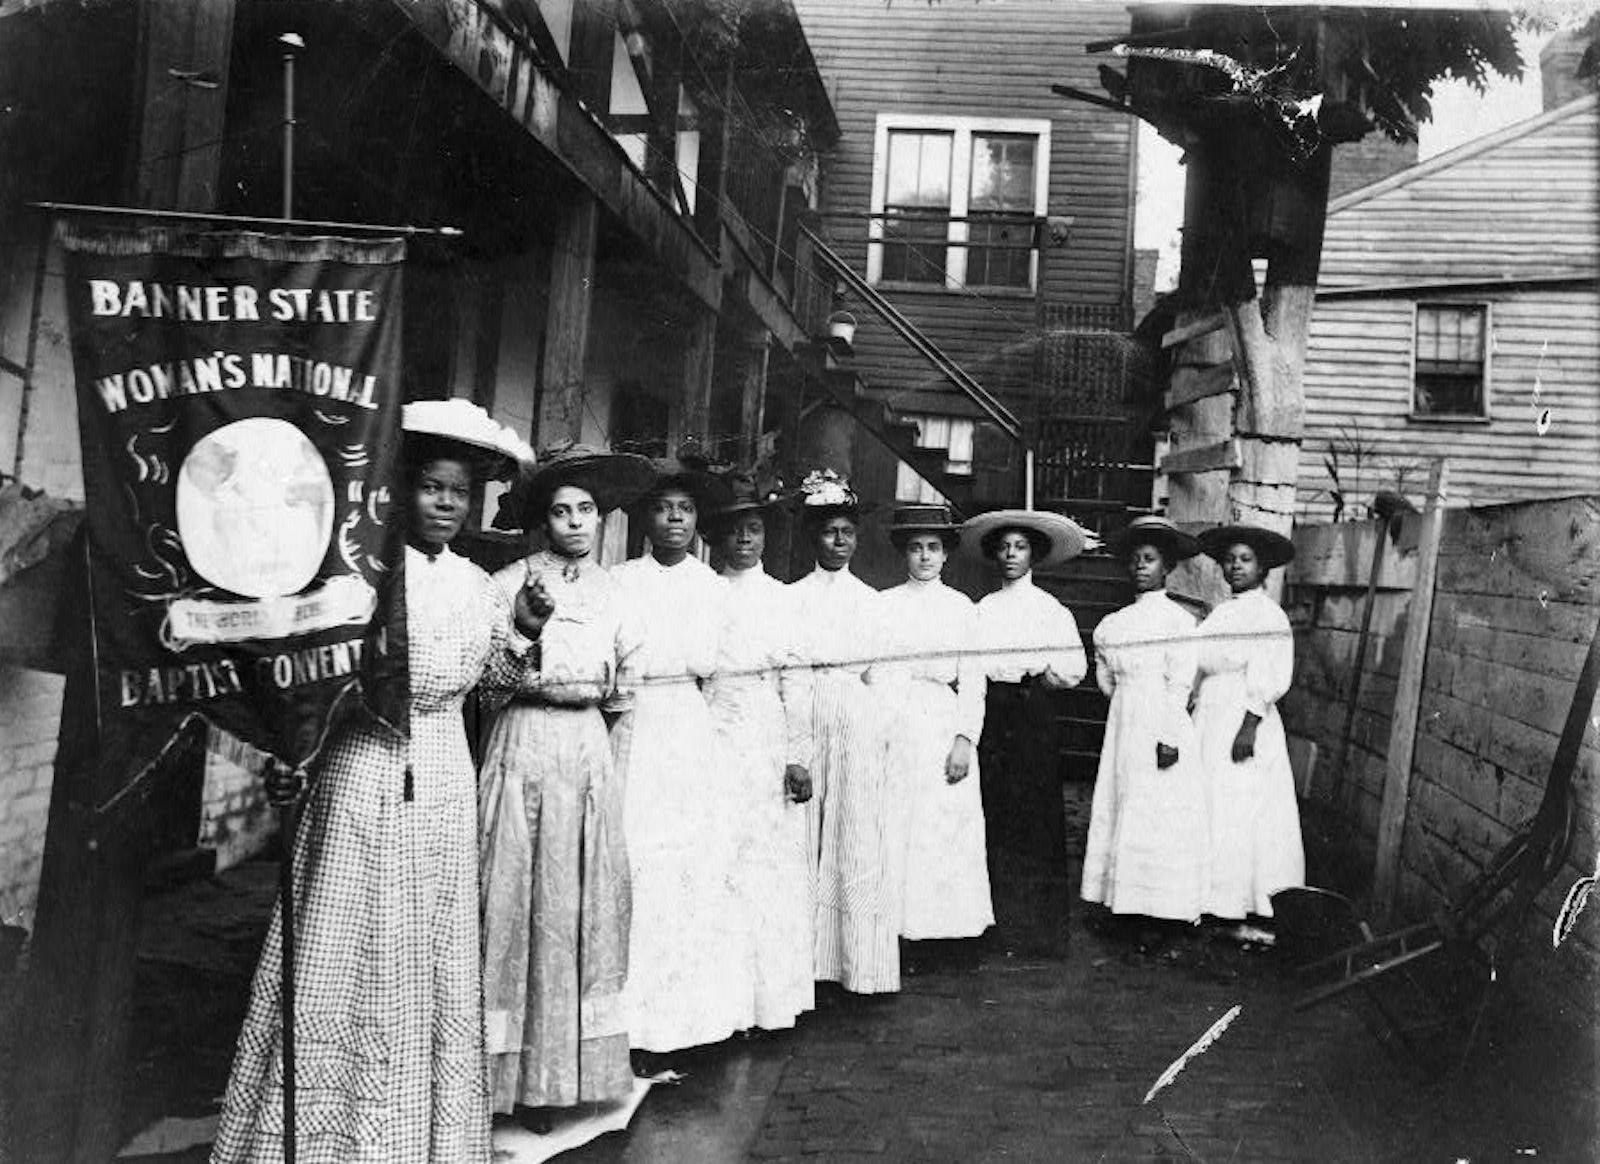 African-American suffragist Nannie Helen Burroughs, far left, at the Banner State Woman’s National Baptist Convention in 1915. Library of Congress. Public Domain.